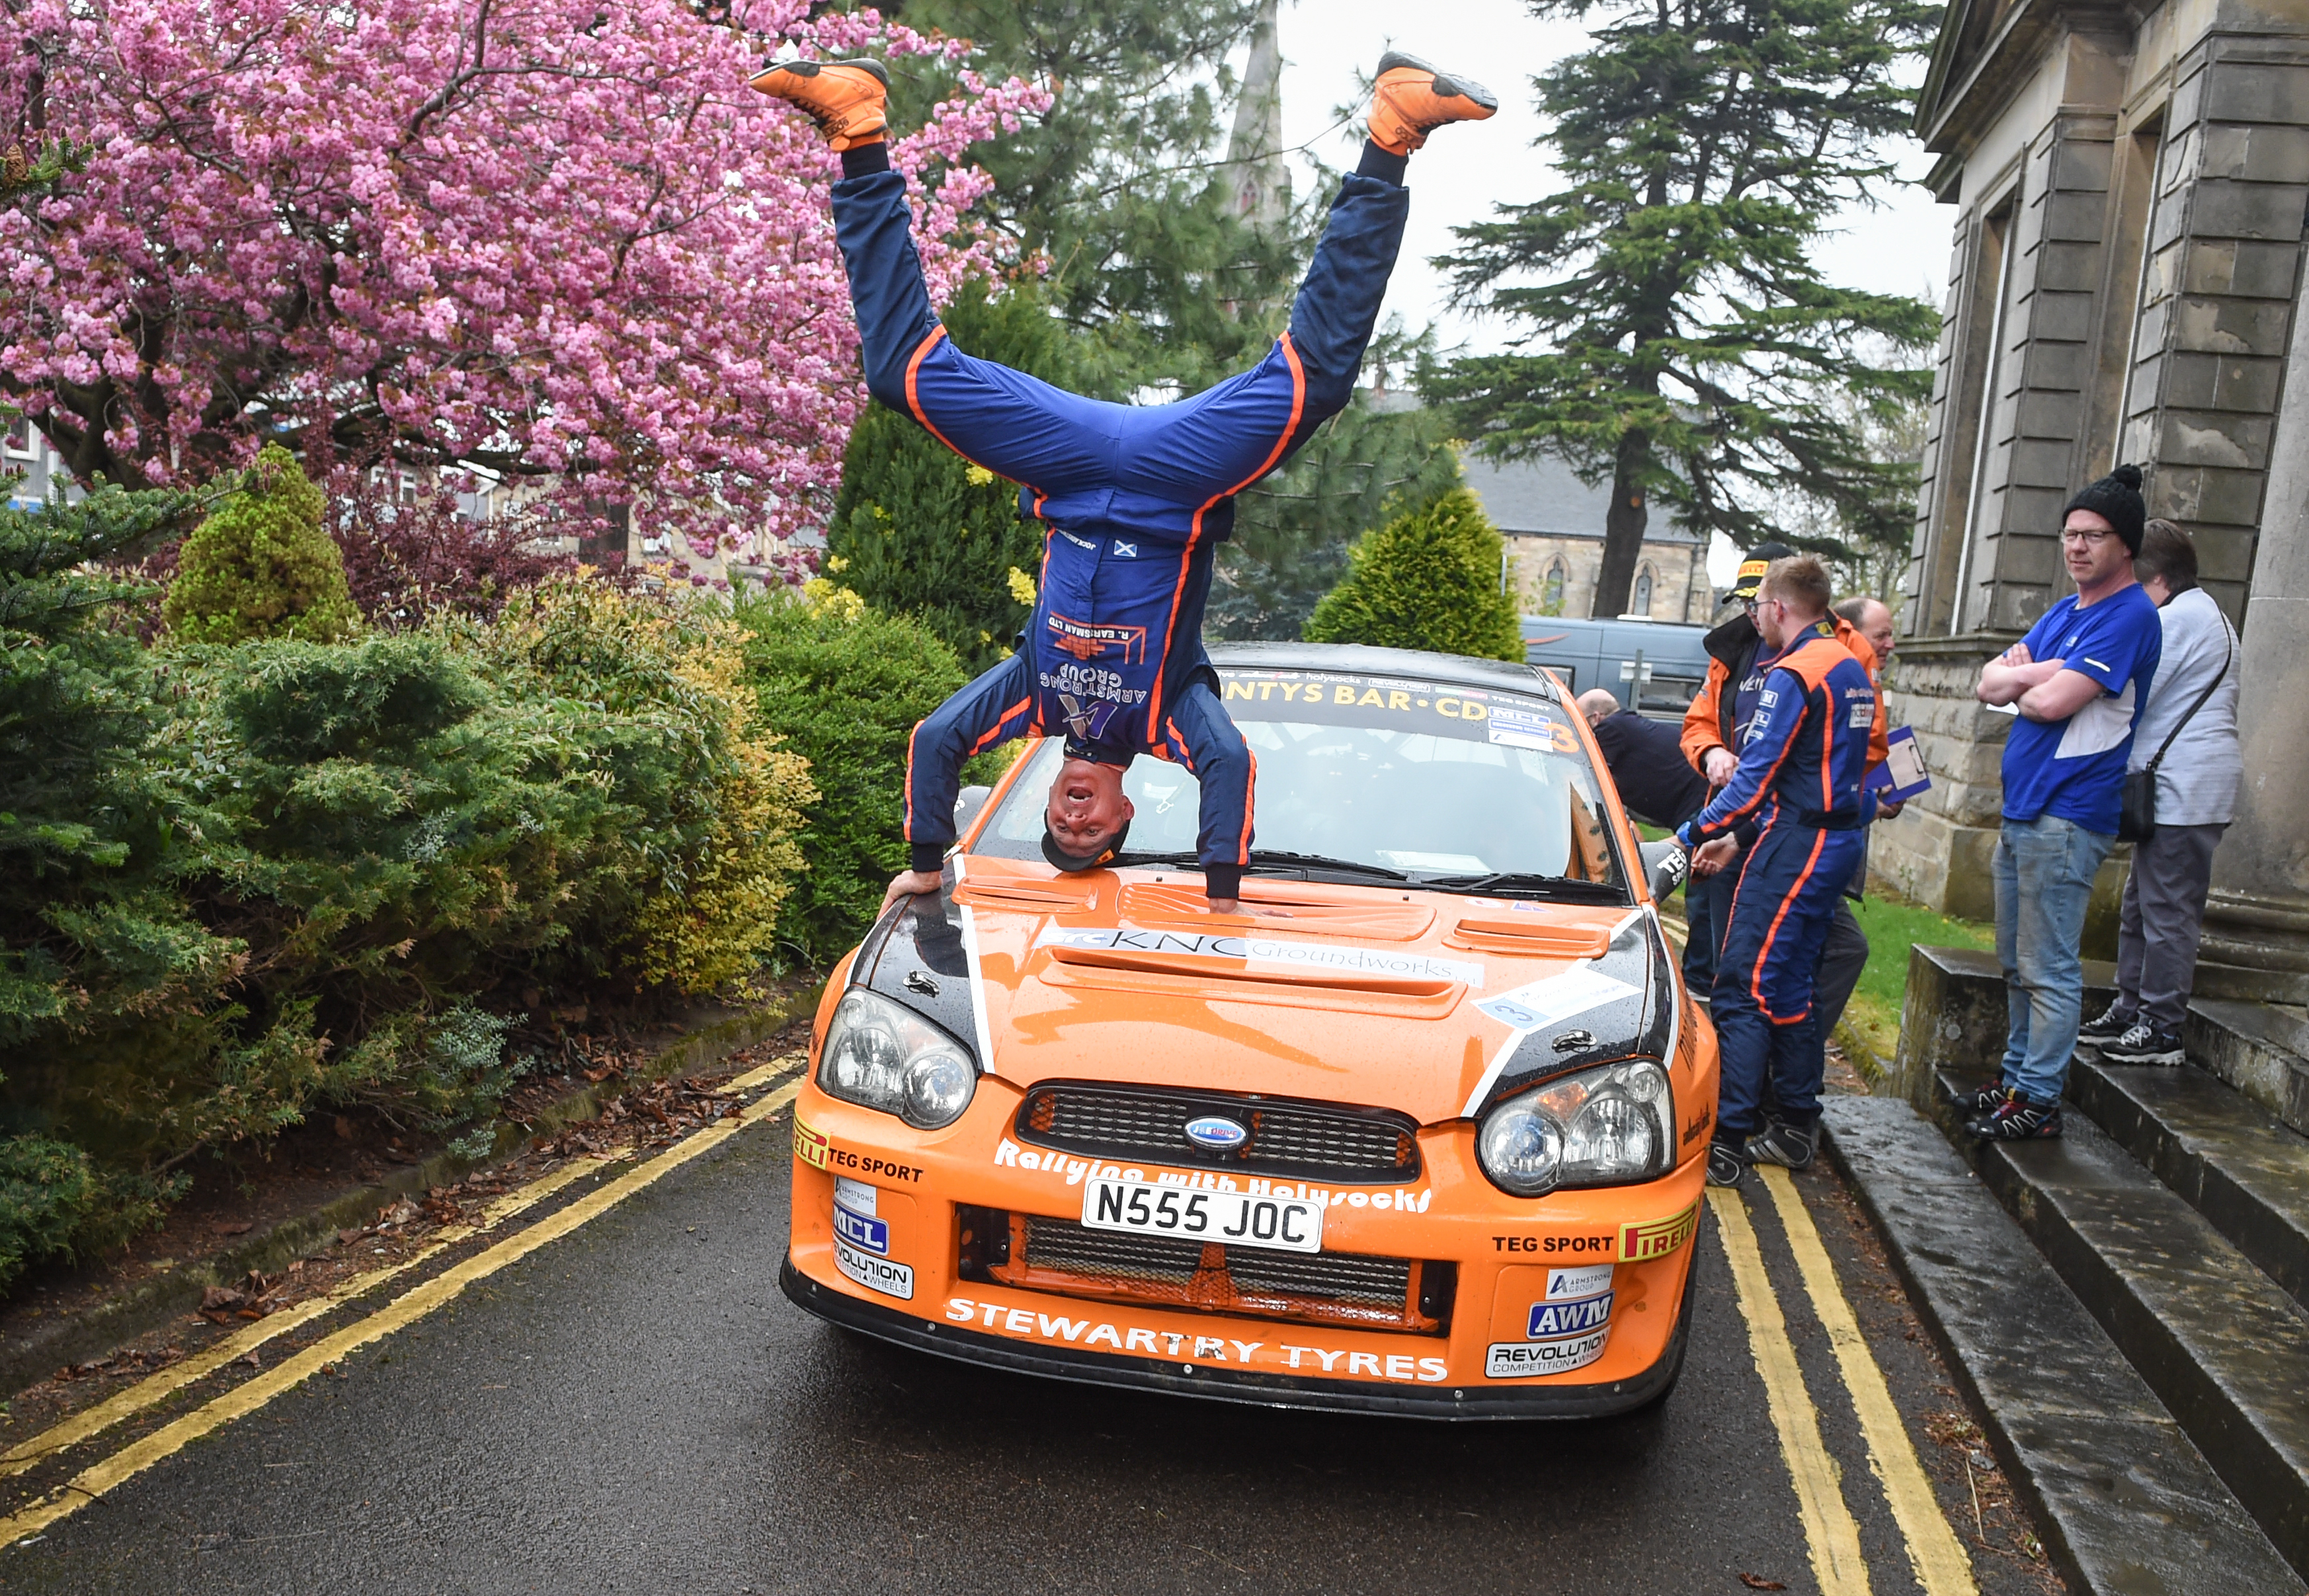 Driver John Armstrong (AKA Jock) is head over heels about his performance